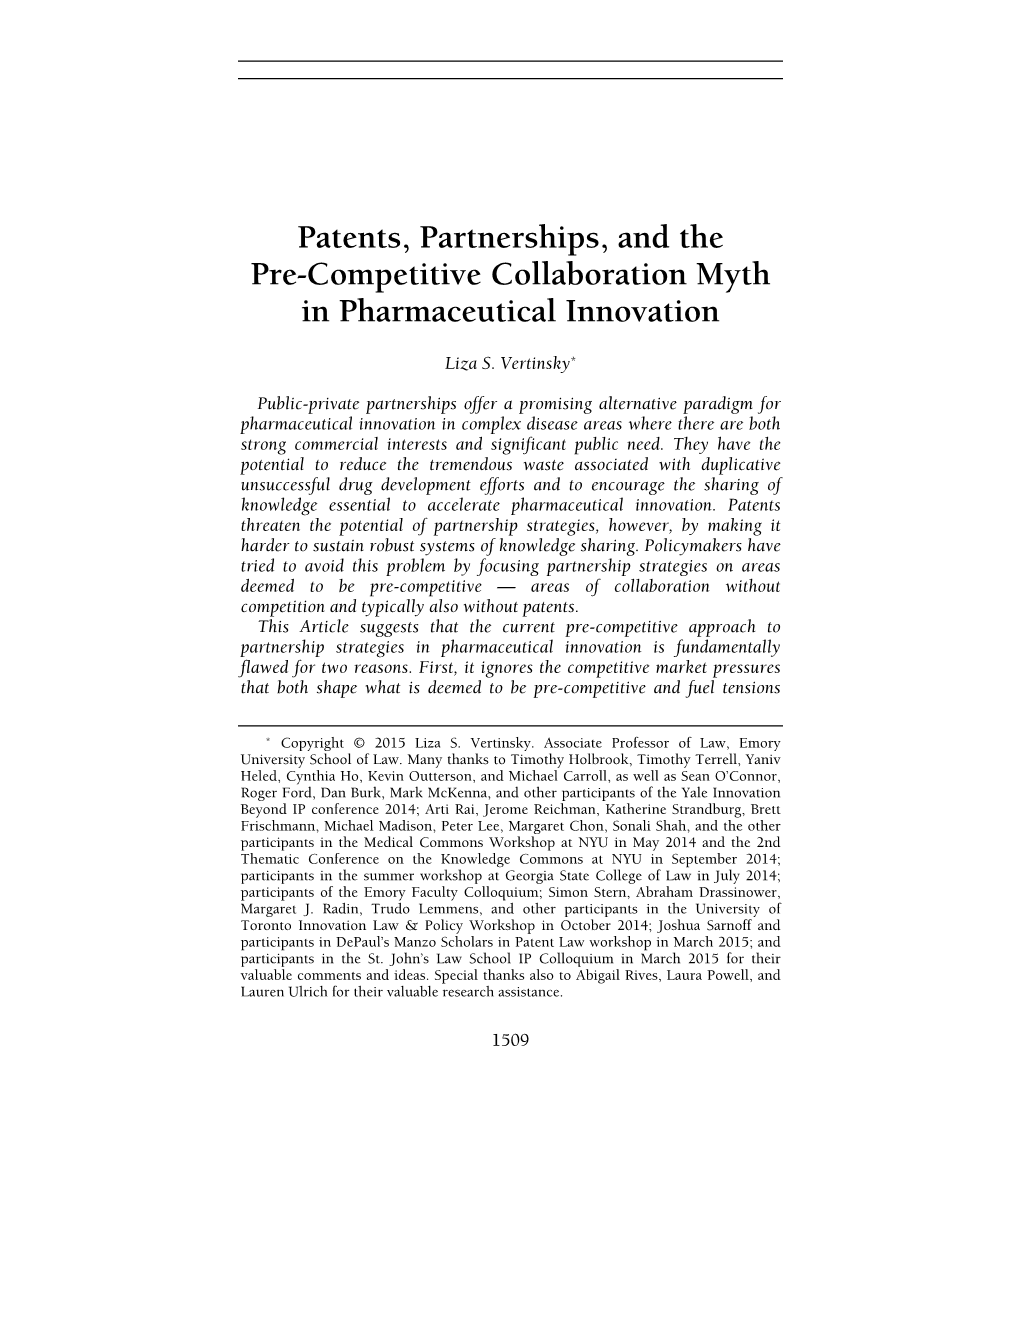 Patents, Partnerships, and the Pre-Competitive Collaboration Myth in Pharmaceutical Innovation